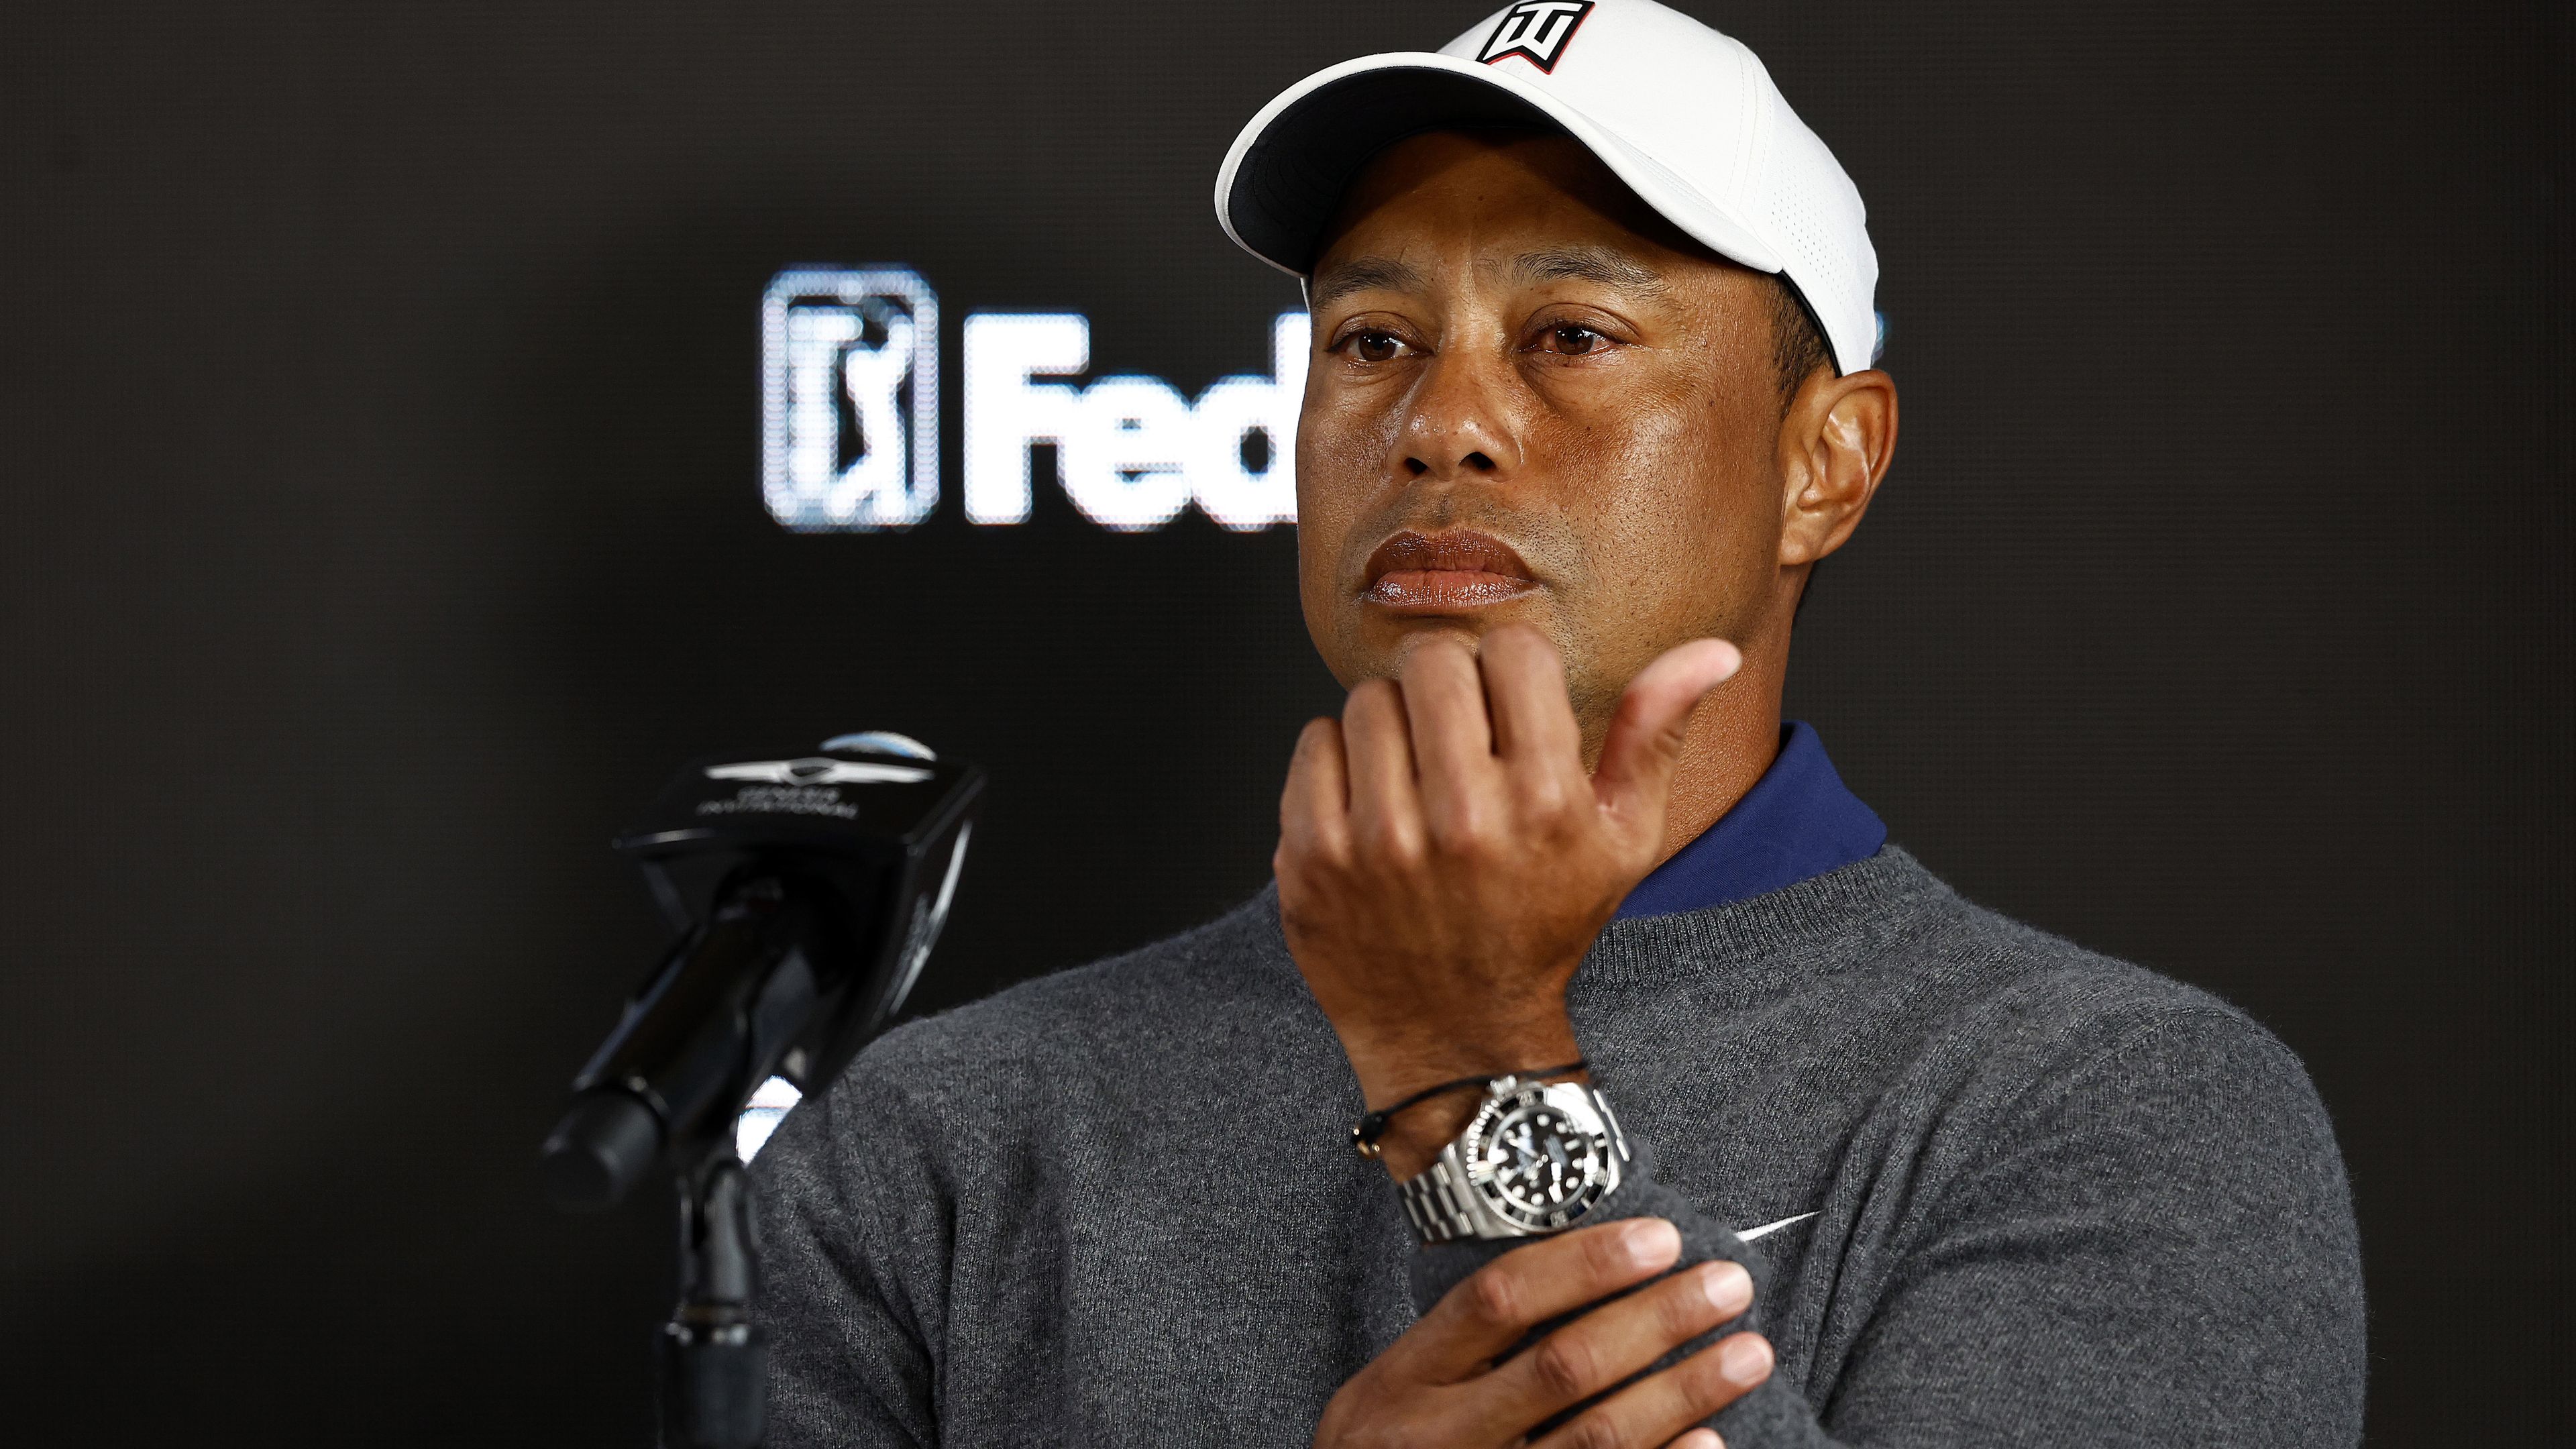 Tiger Woods' admission ahead of awkward reunion with LIV Golf rebels